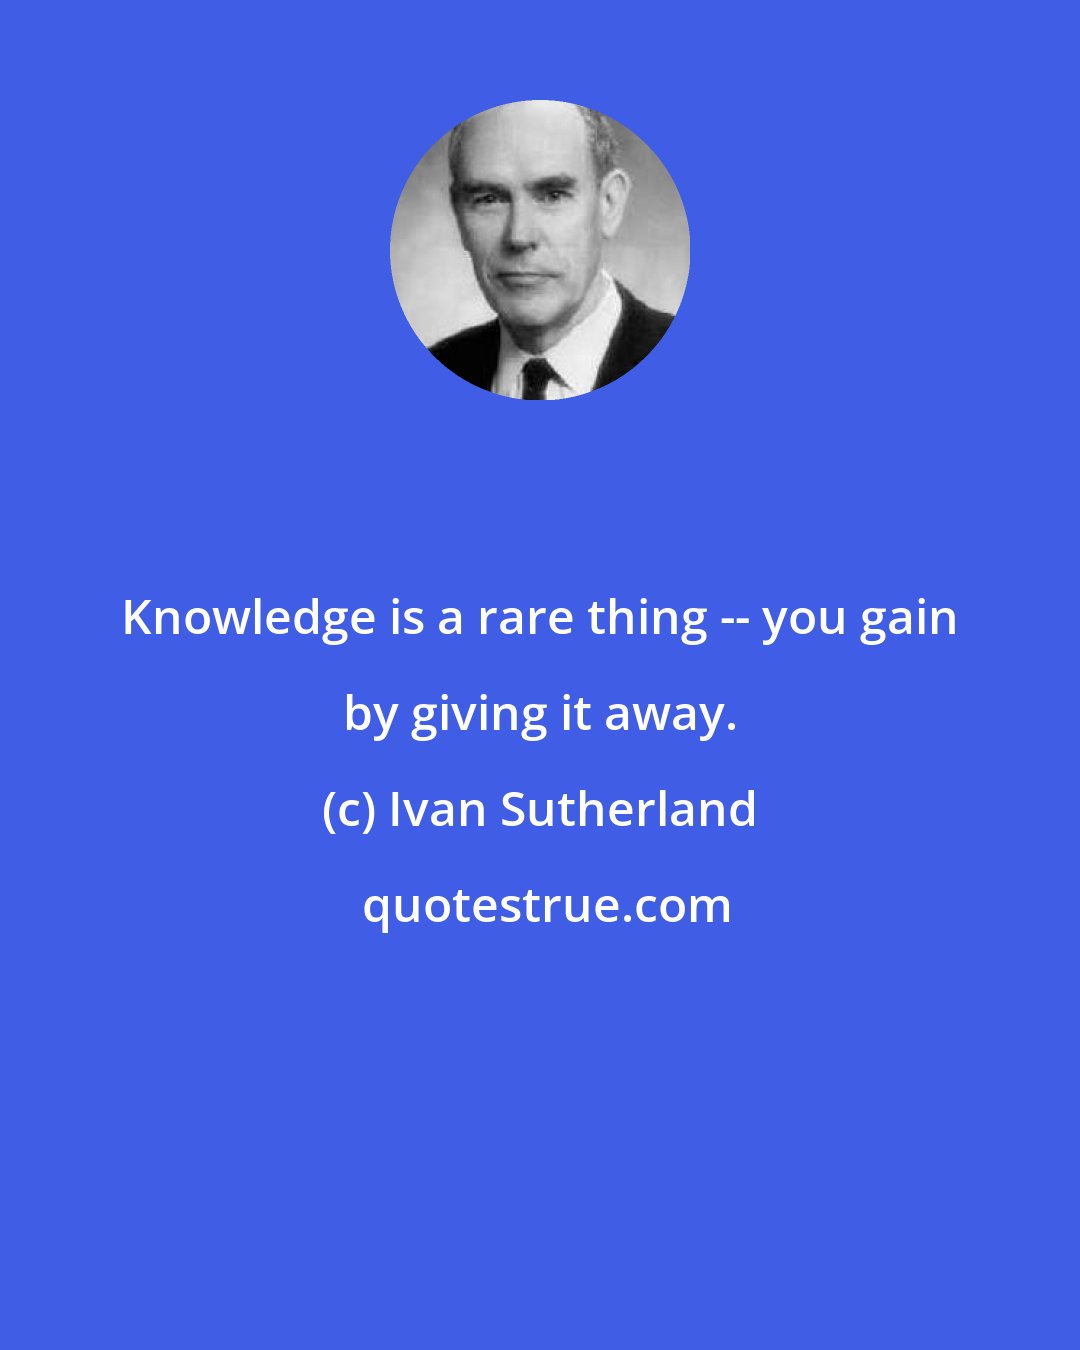 Ivan Sutherland: Knowledge is a rare thing -- you gain by giving it away.